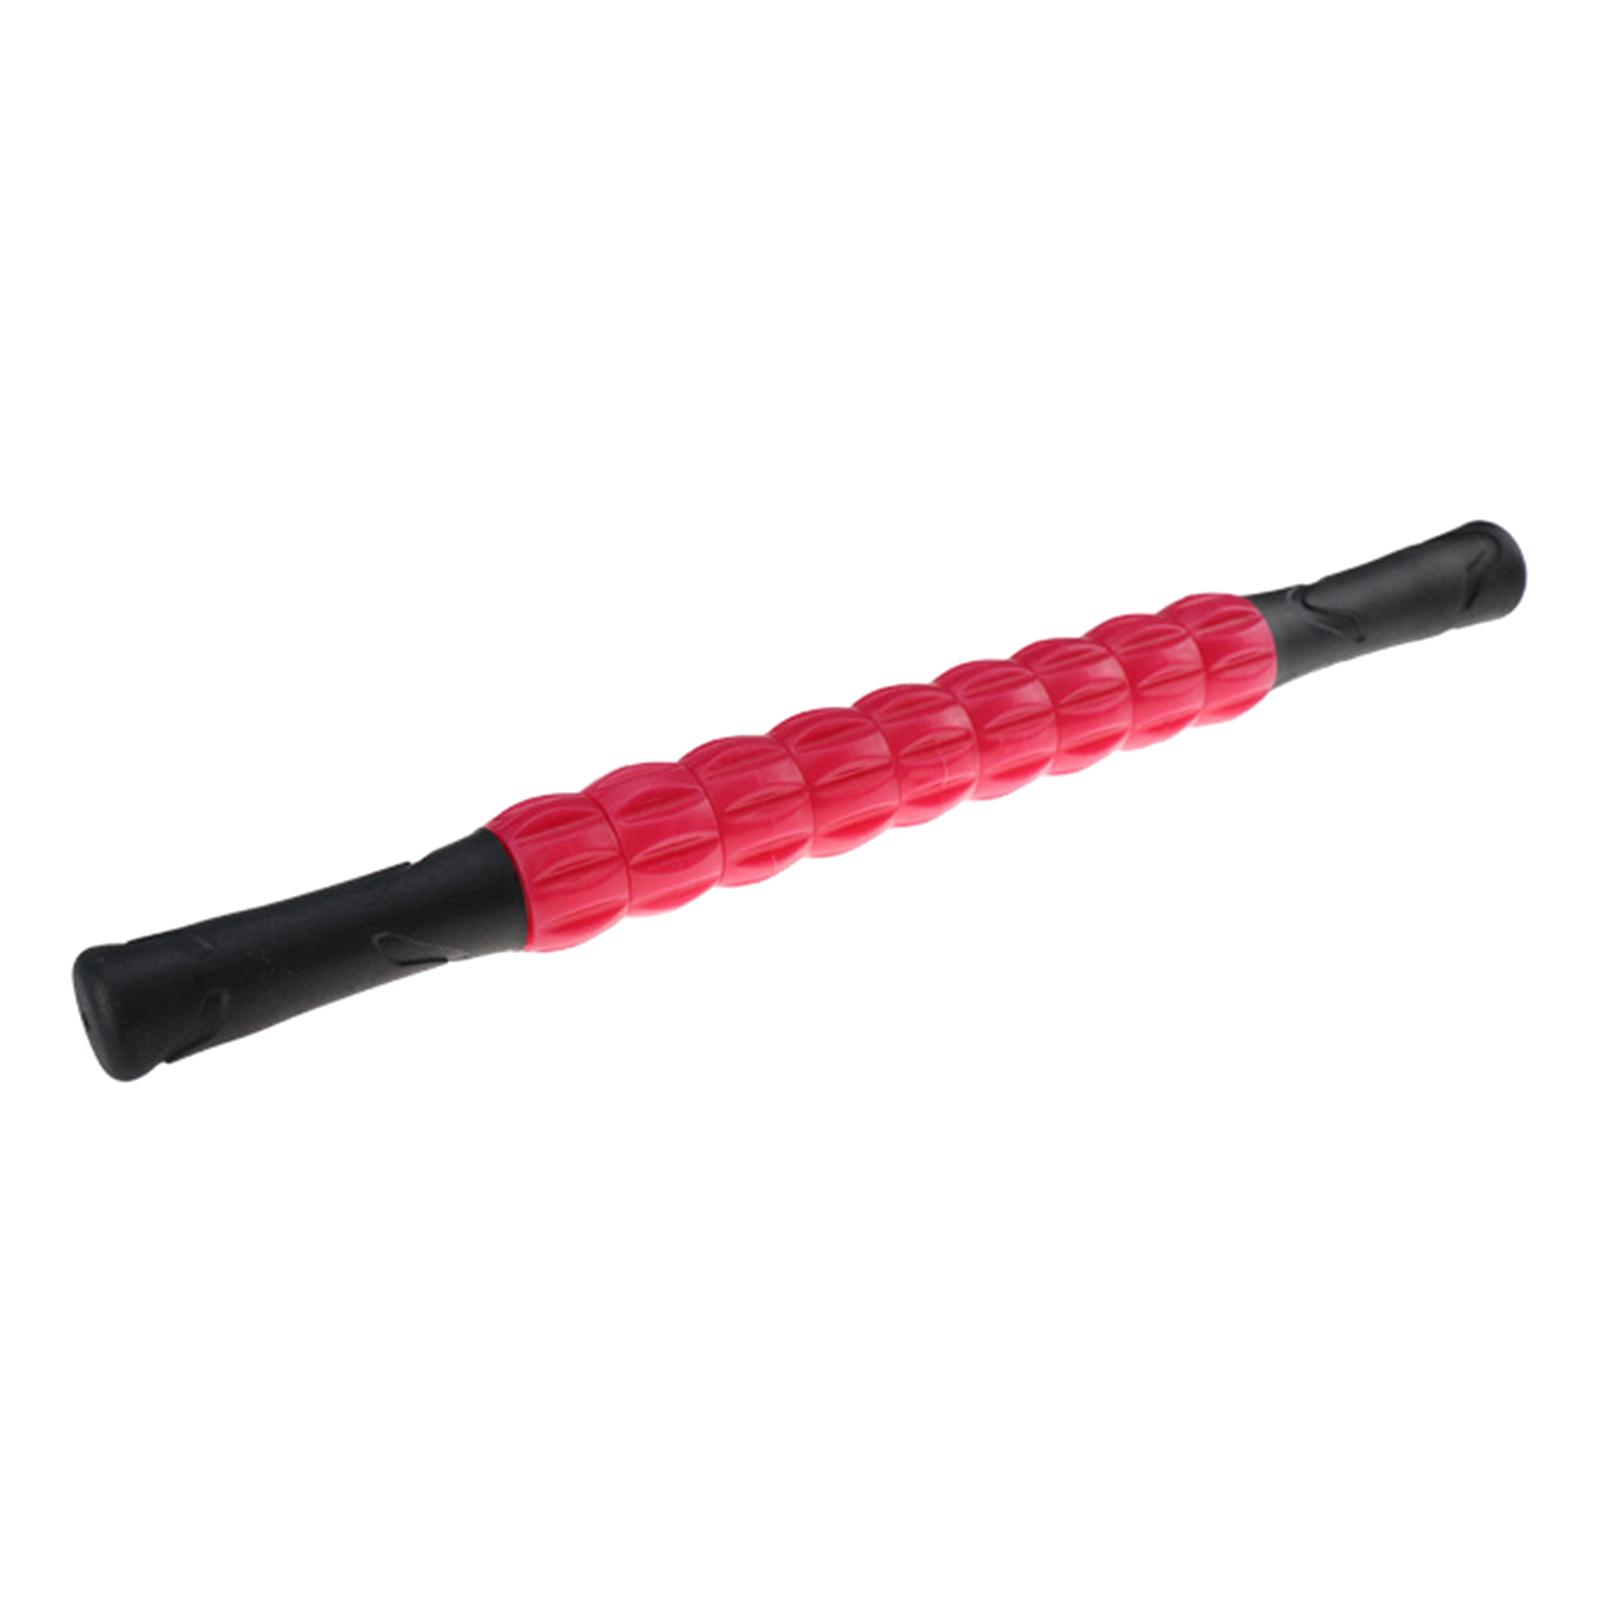 Portable Muscle Roller Stick for Athletes Full Body Massage Sticks Rose Red